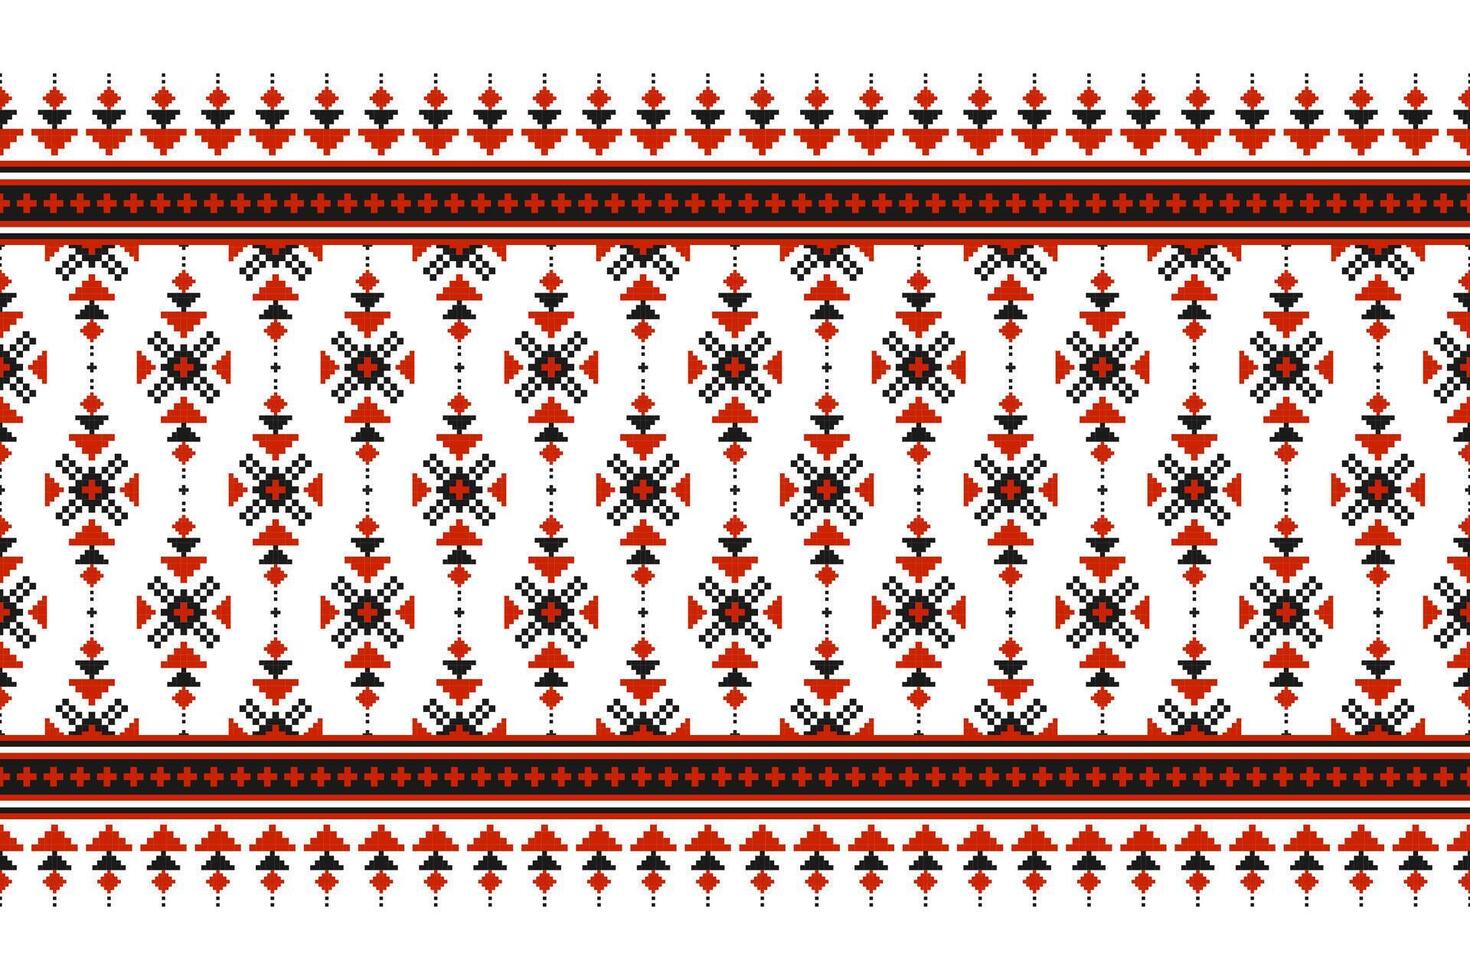 Geometric ethnic seamless pattern traditional. American, Mexican style. Aztec tribal ornament print. Design for background, wallpaper, illustration, fabric, clothing, carpet, batik, embroidery. vector